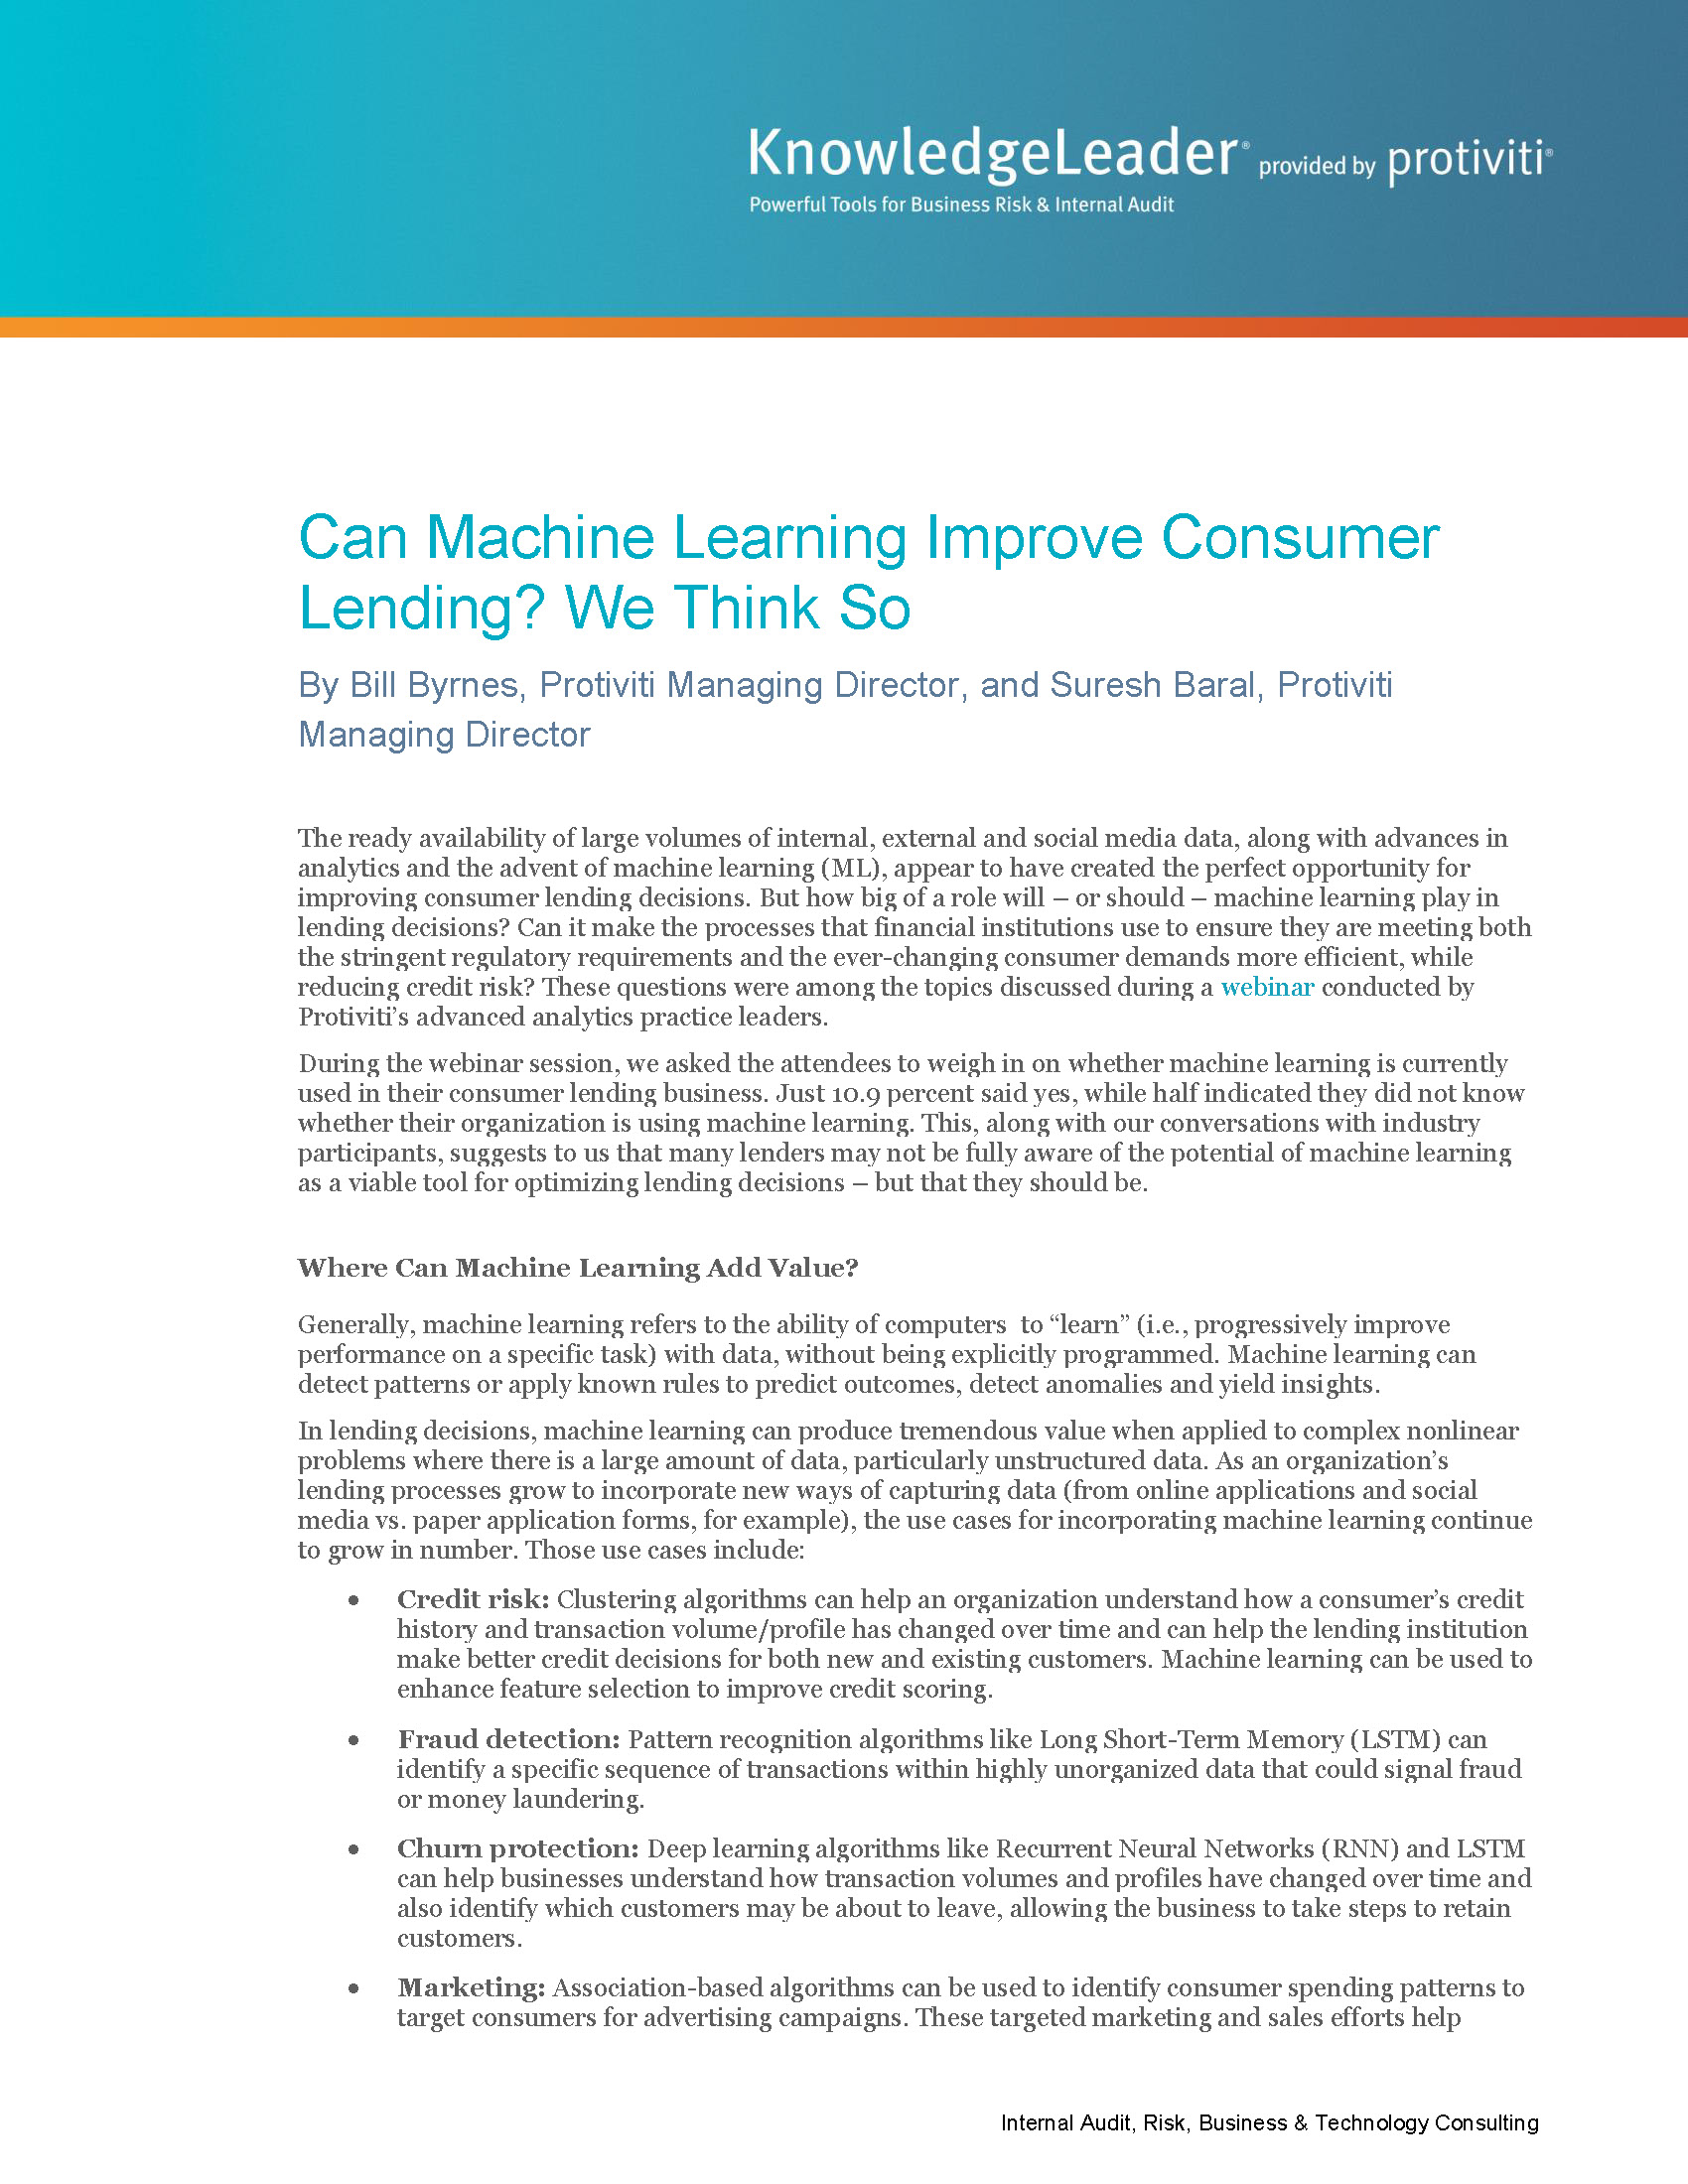 Screenshot of the first page of Can Machine Learning Improve Consumer Lending? We Think So